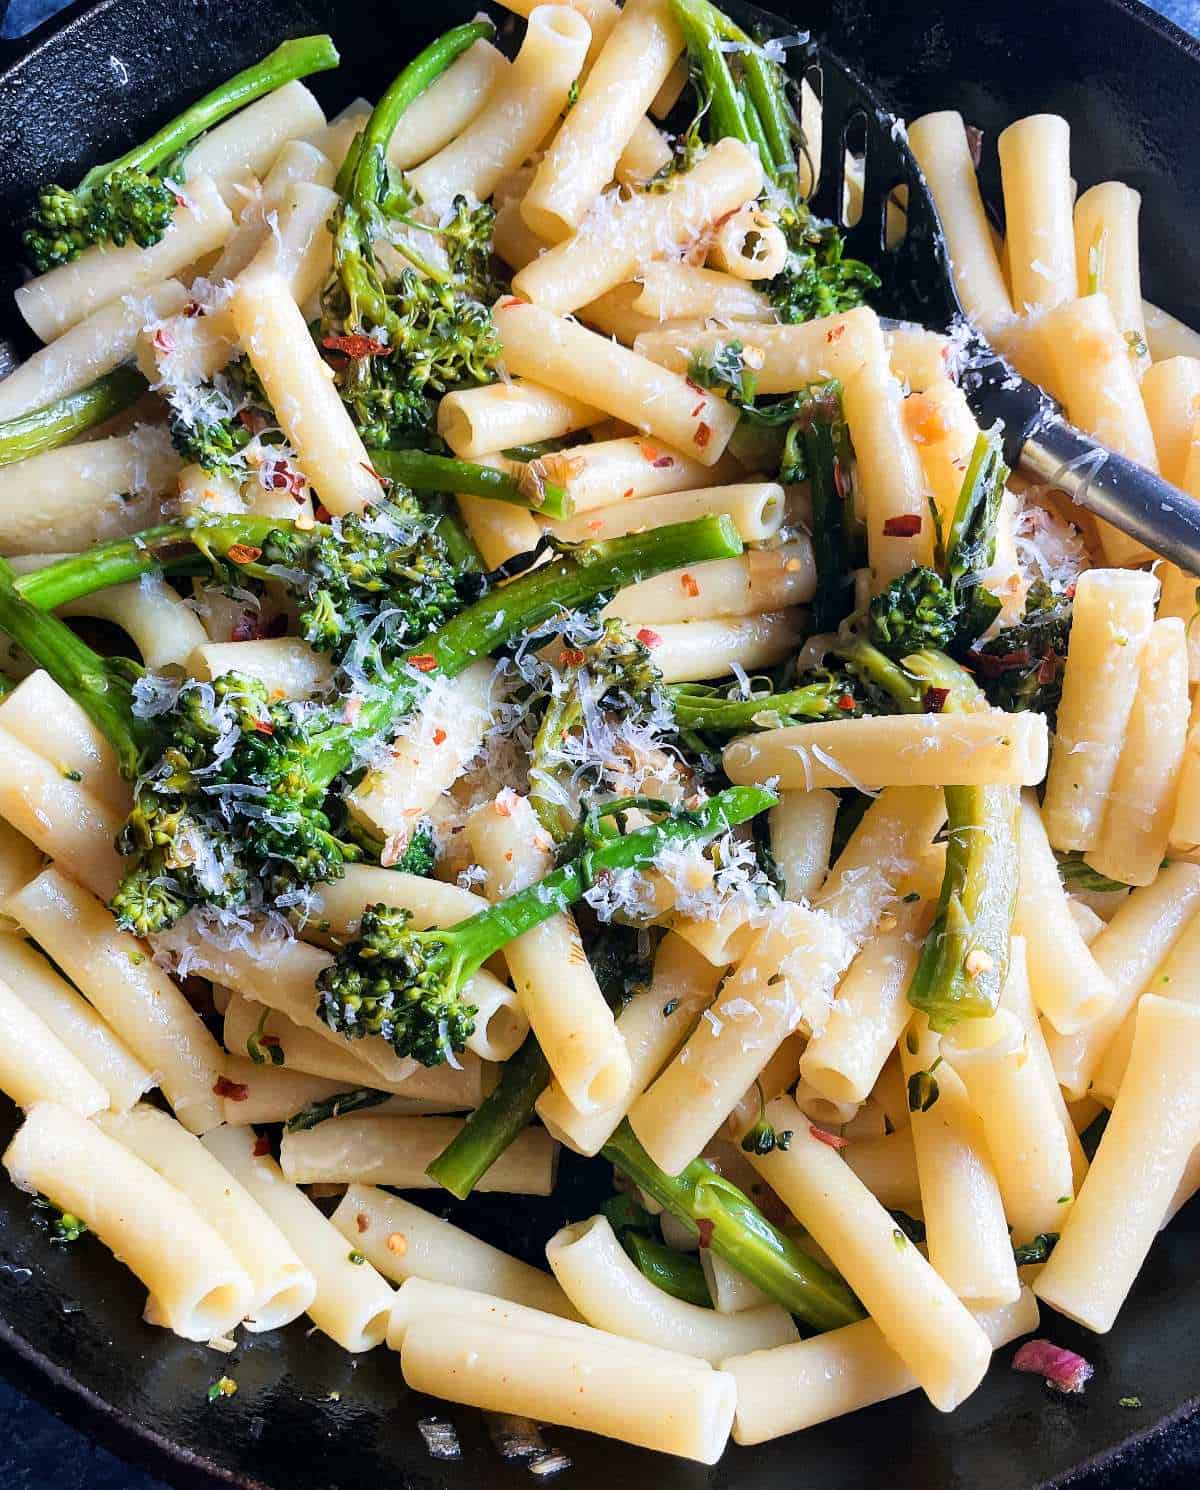 stirring ziti pasta with broccolini and cheese in a skillet.